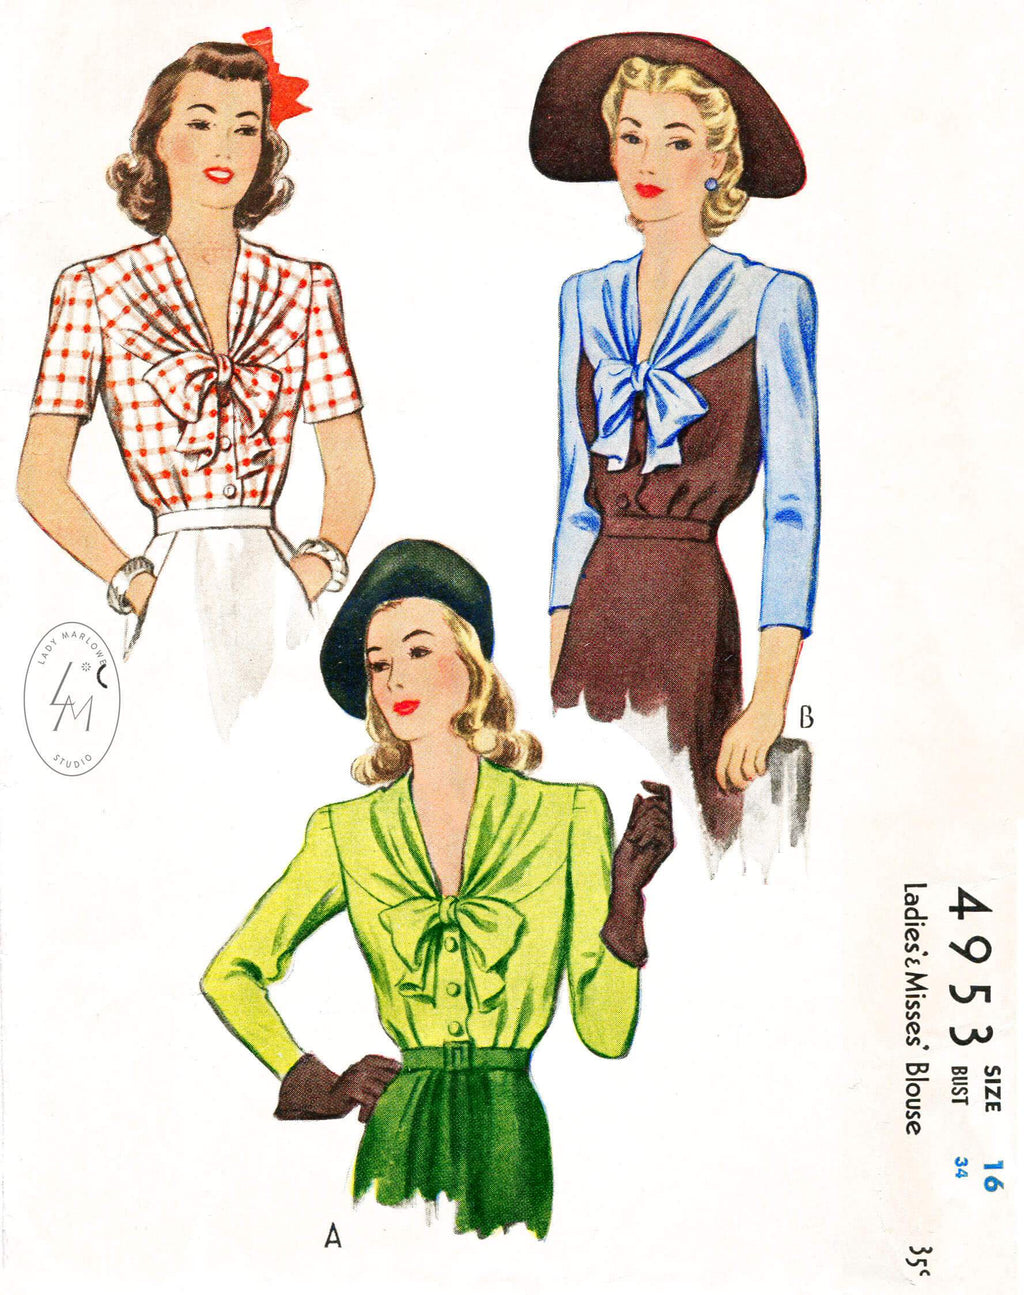 McCall 4953 1940s blouse vintage sewing pattern